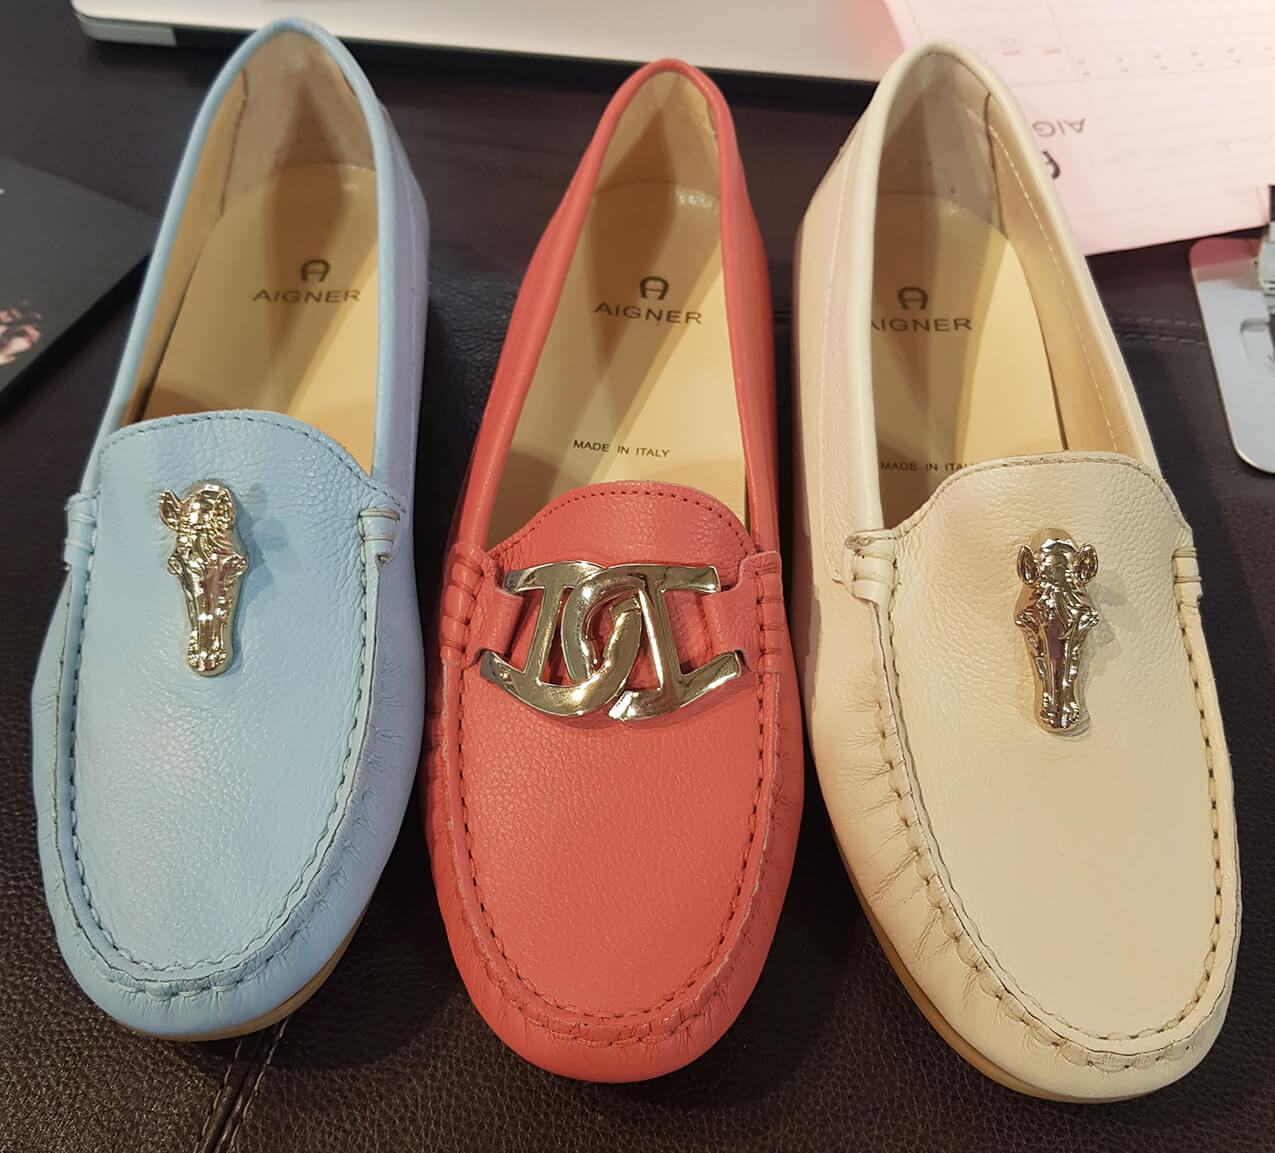 Presenting our upcoming AIGNER moccasins